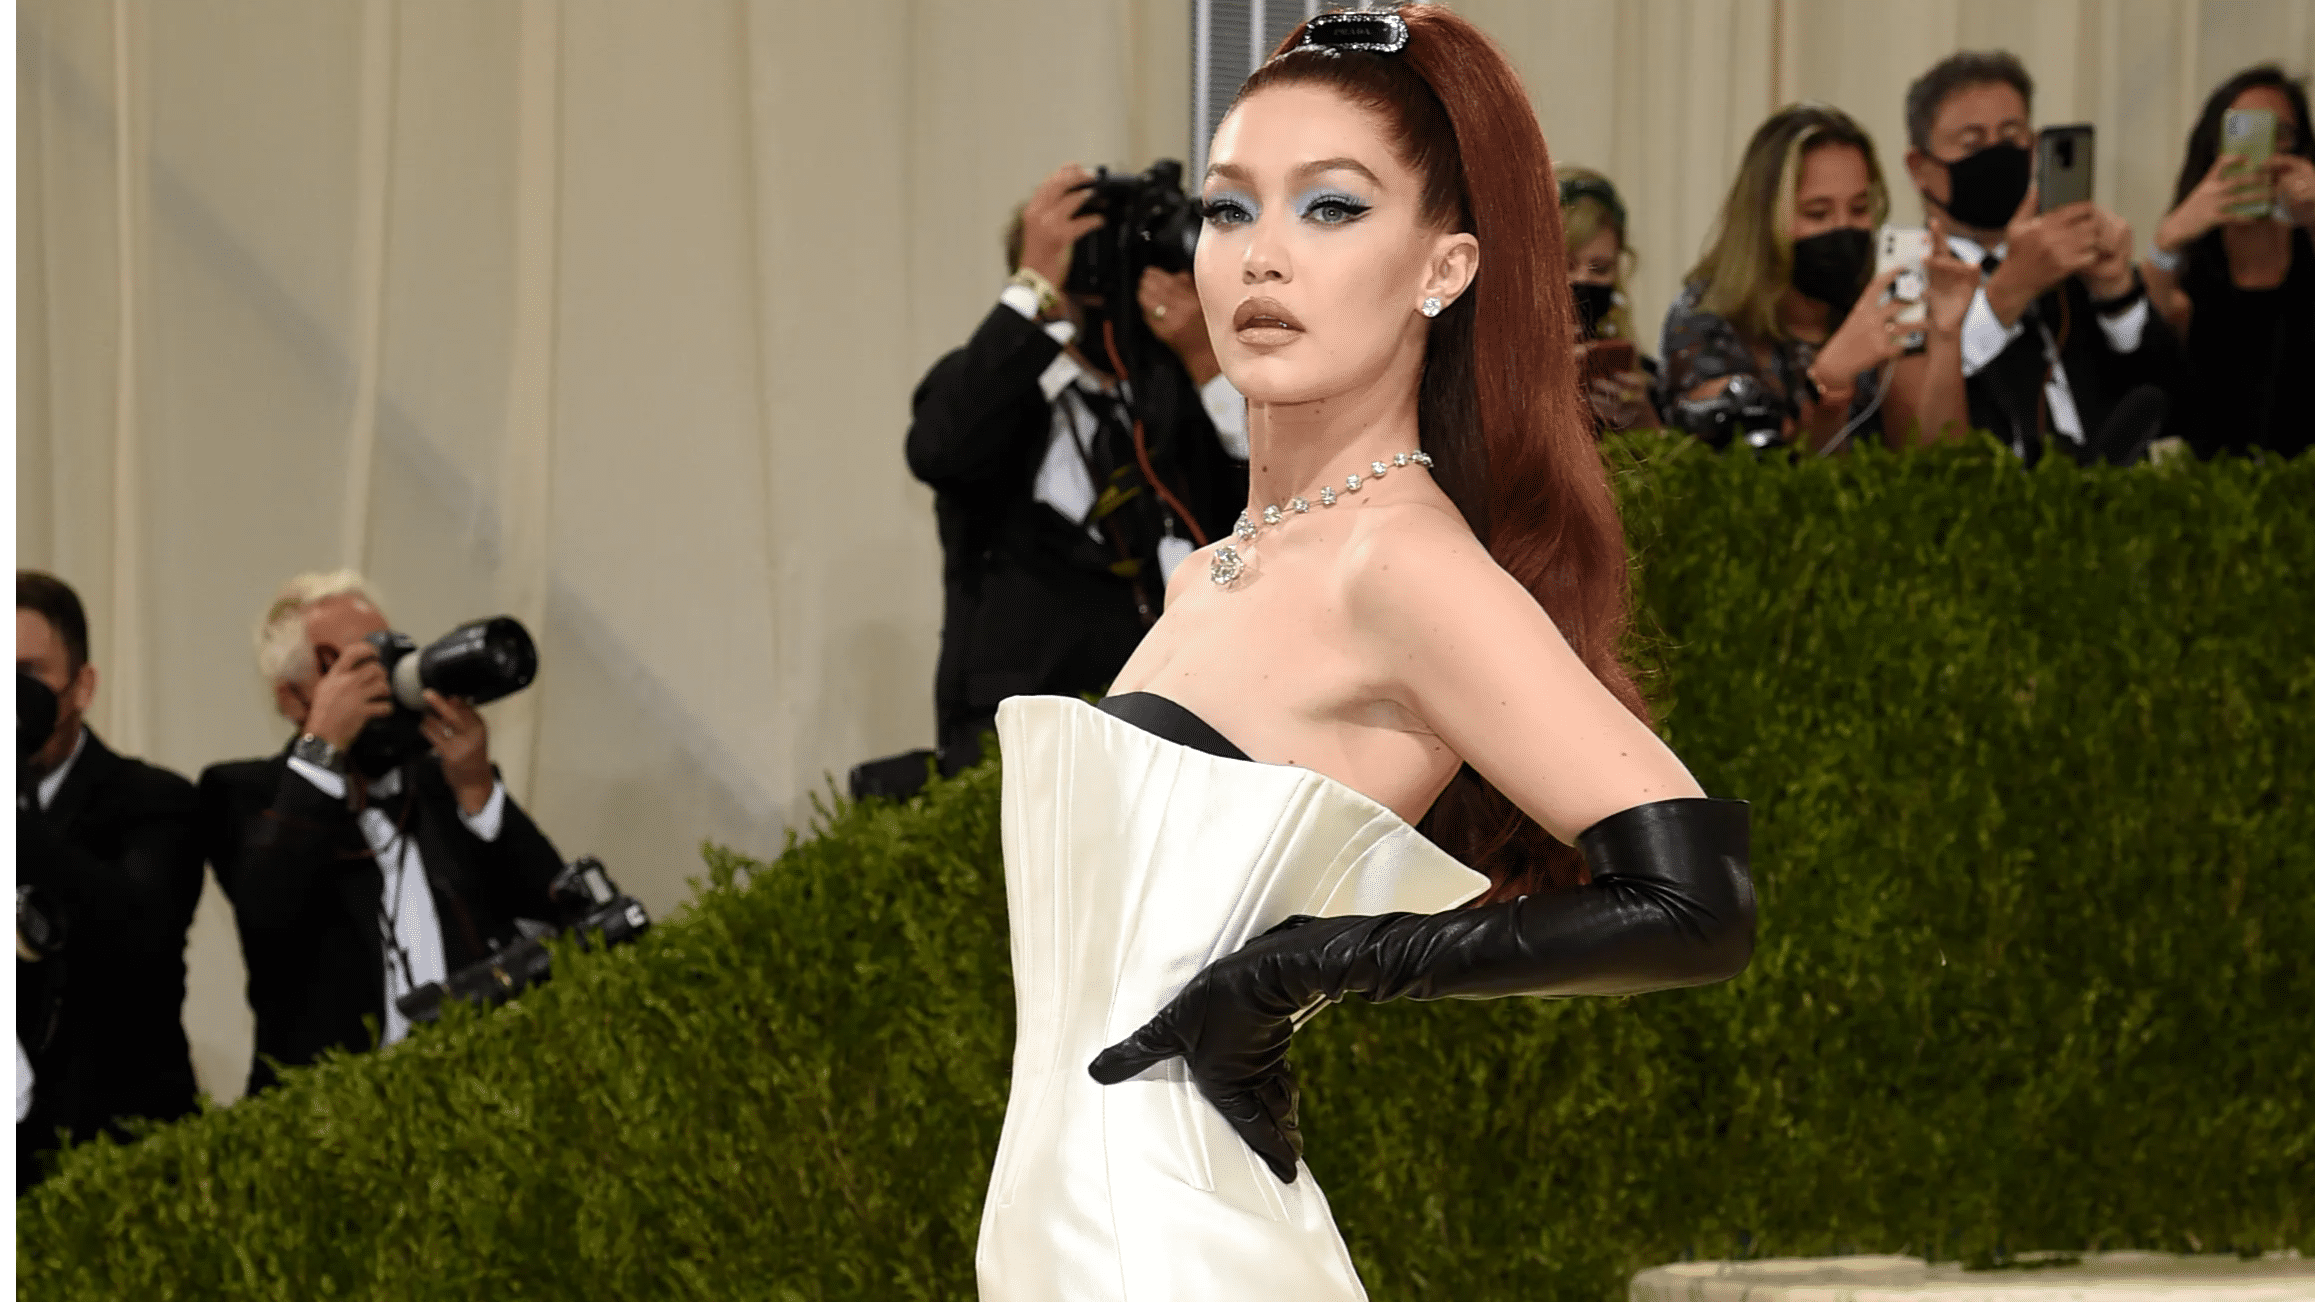 Met Gala 2021: Gigi Hadid unites with bestie Kendall Jenner at the red carpet